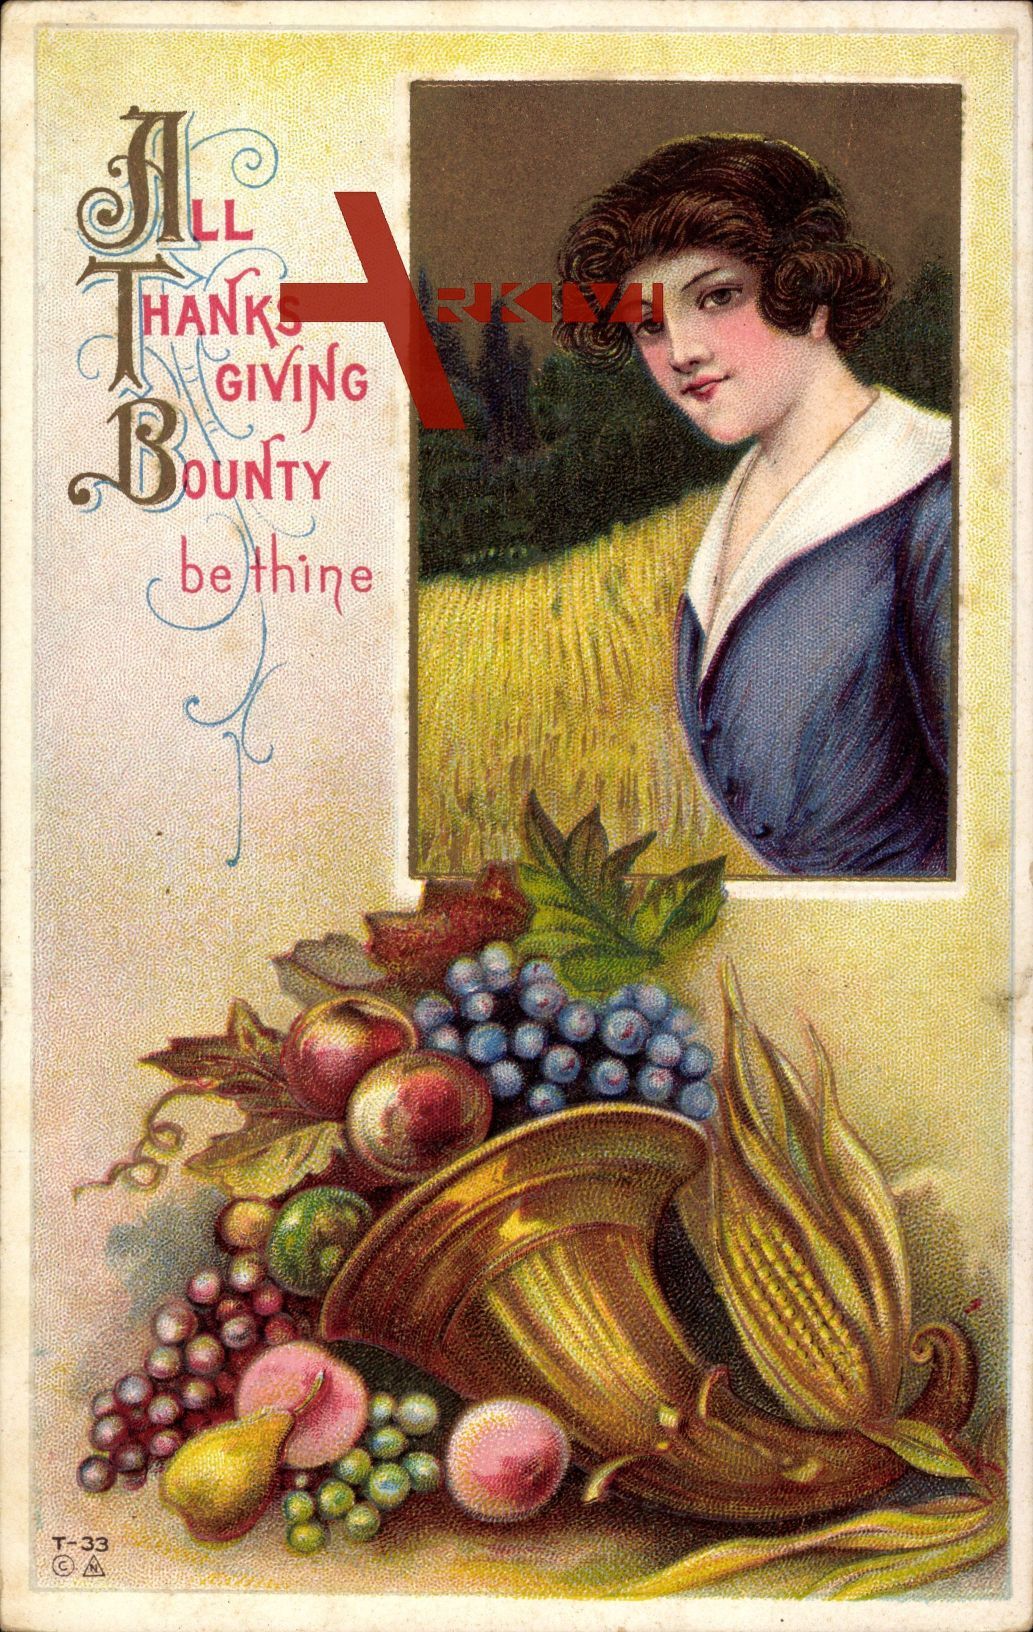 All Thanksgiving Bounty be thine, woman, fruits